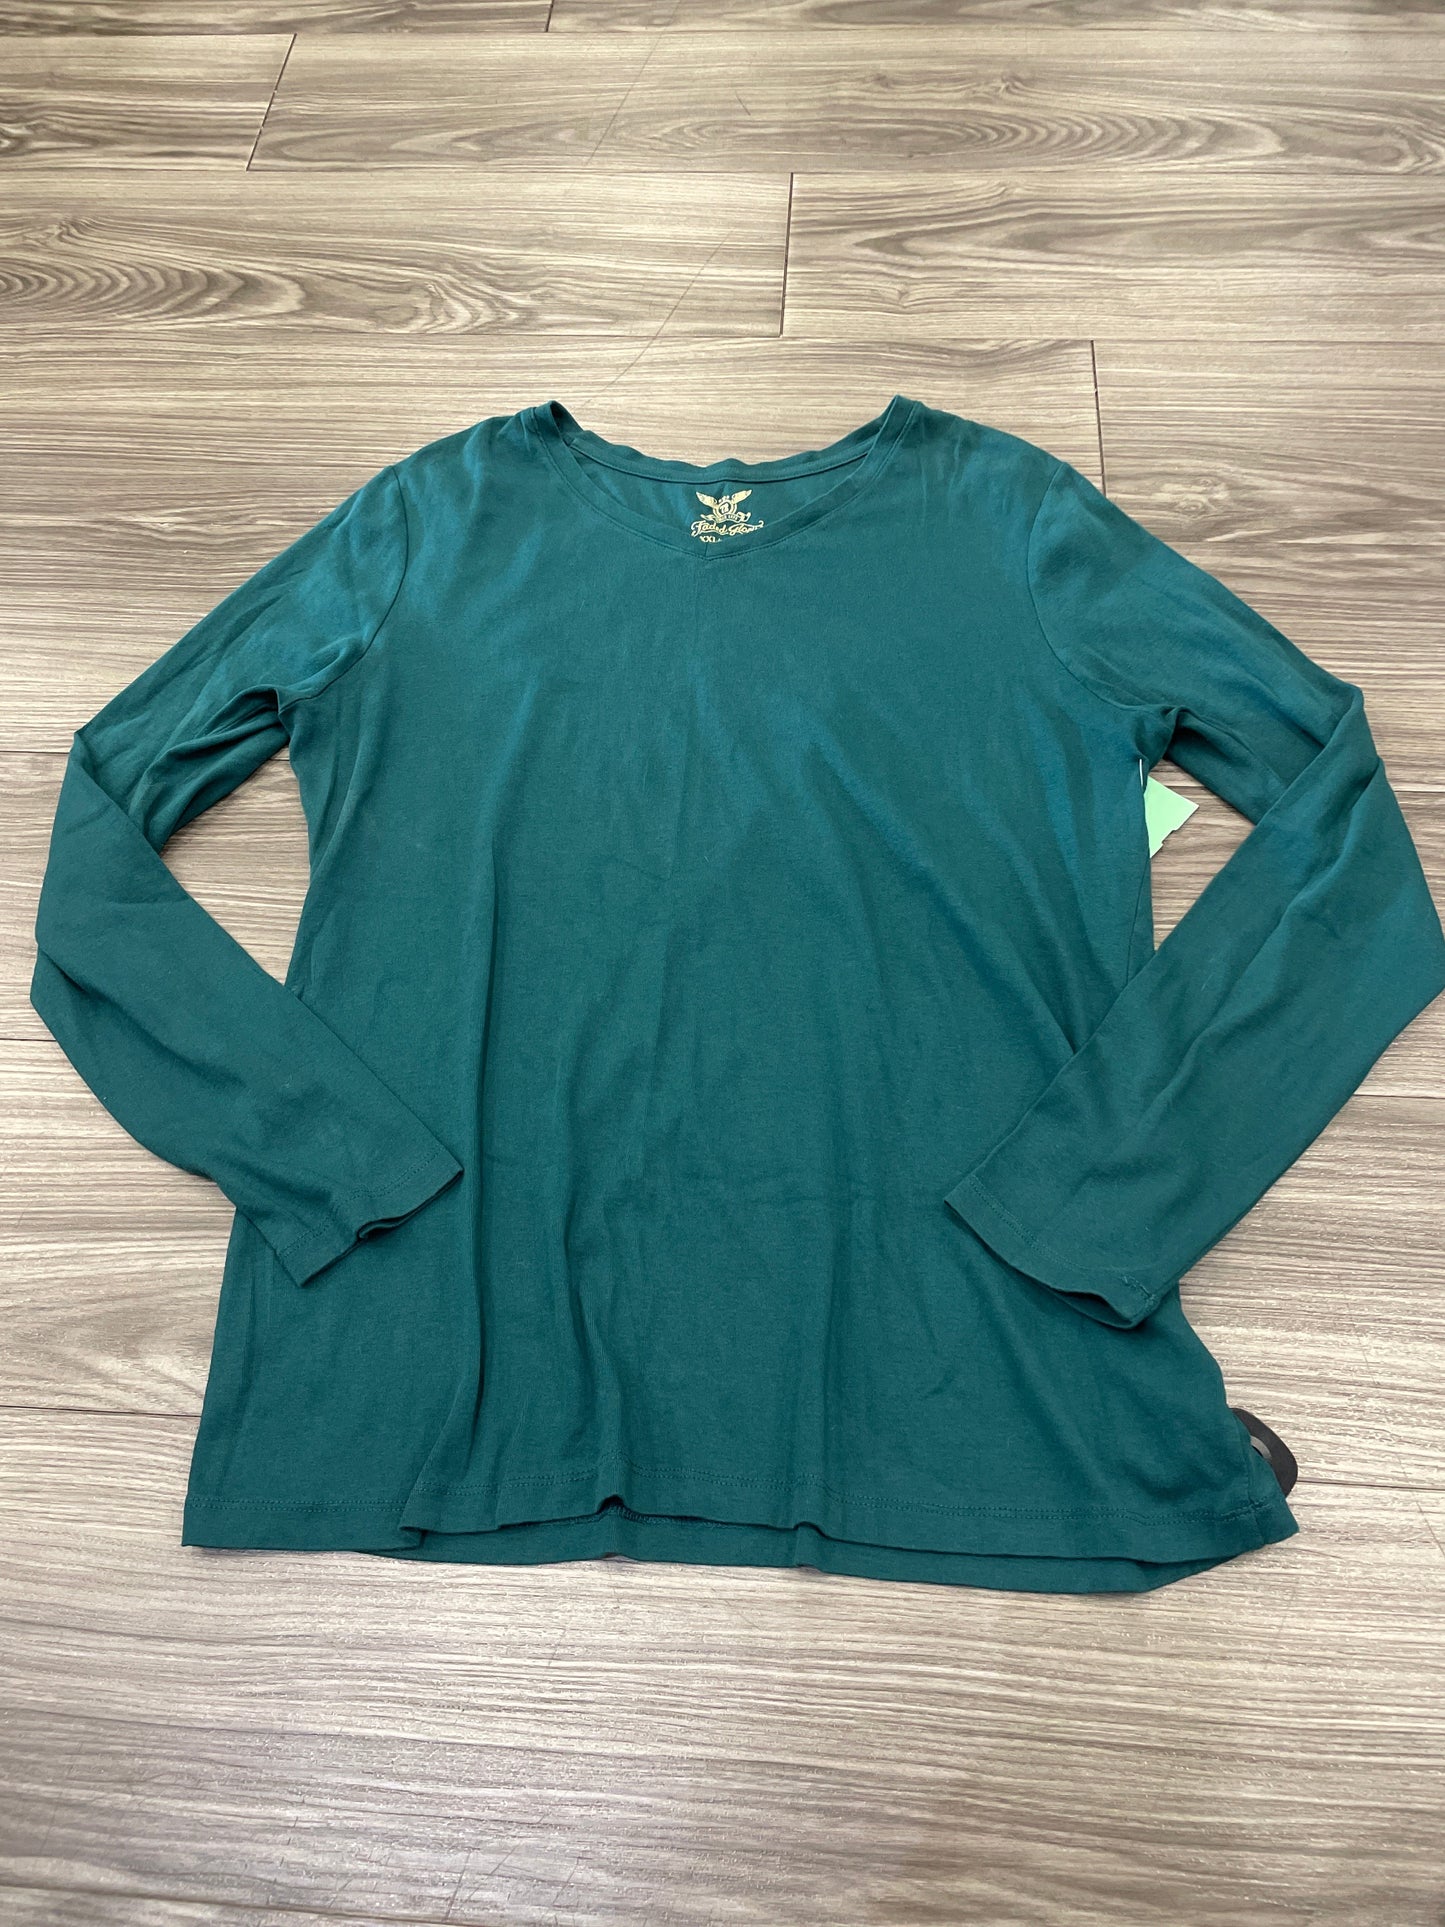 Teal Top Long Sleeve Faded Glory, Size 2x